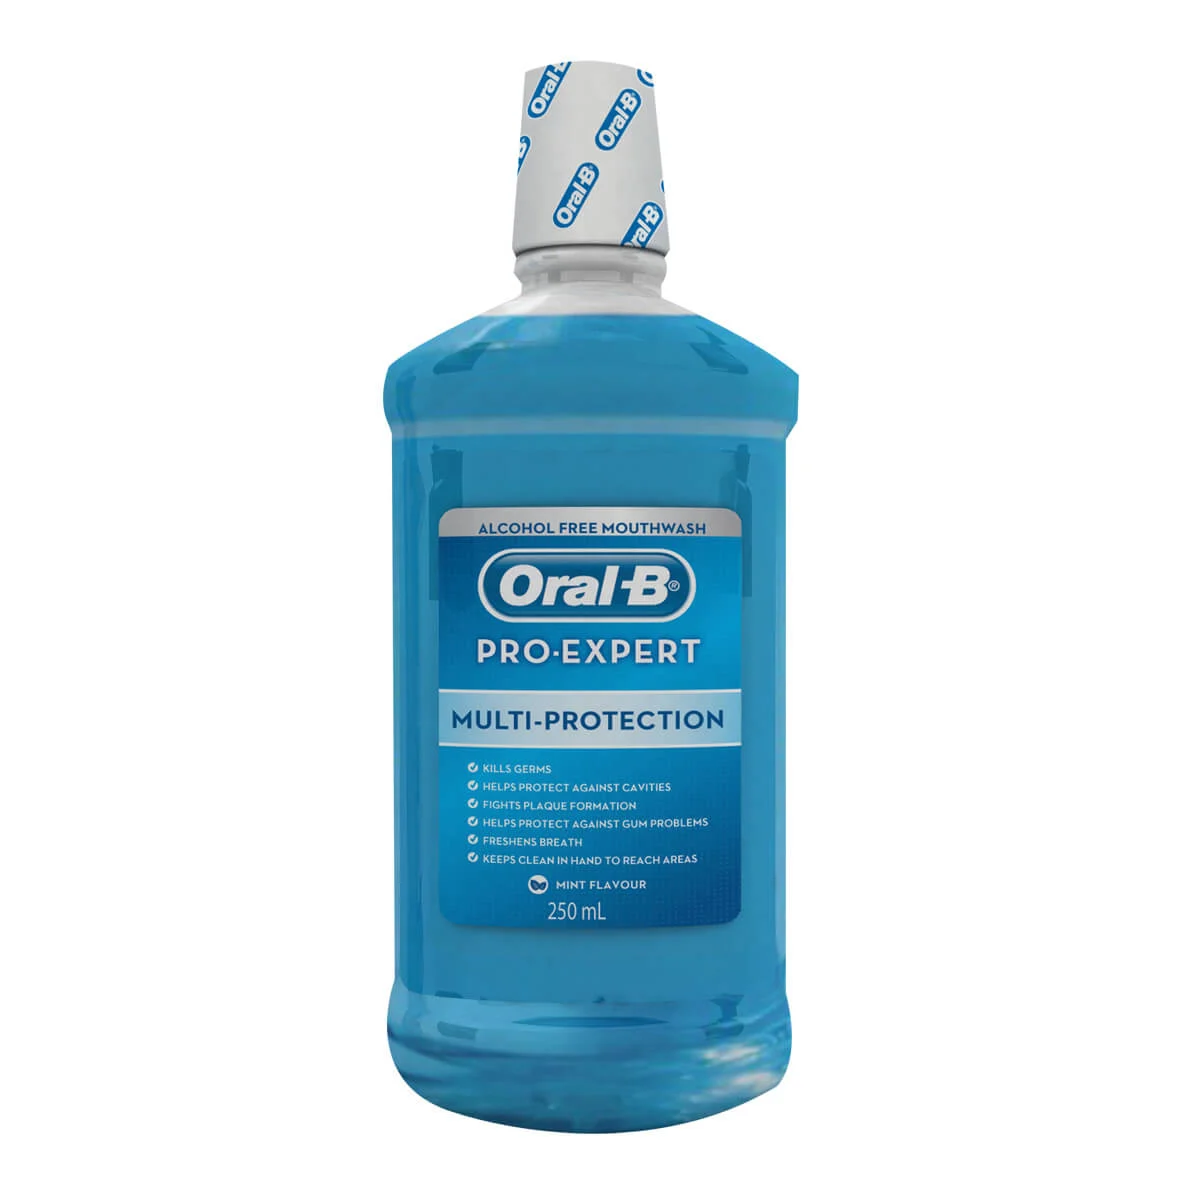 Oral-B Pro-Expert Multi-Protection Mouthwash undefined